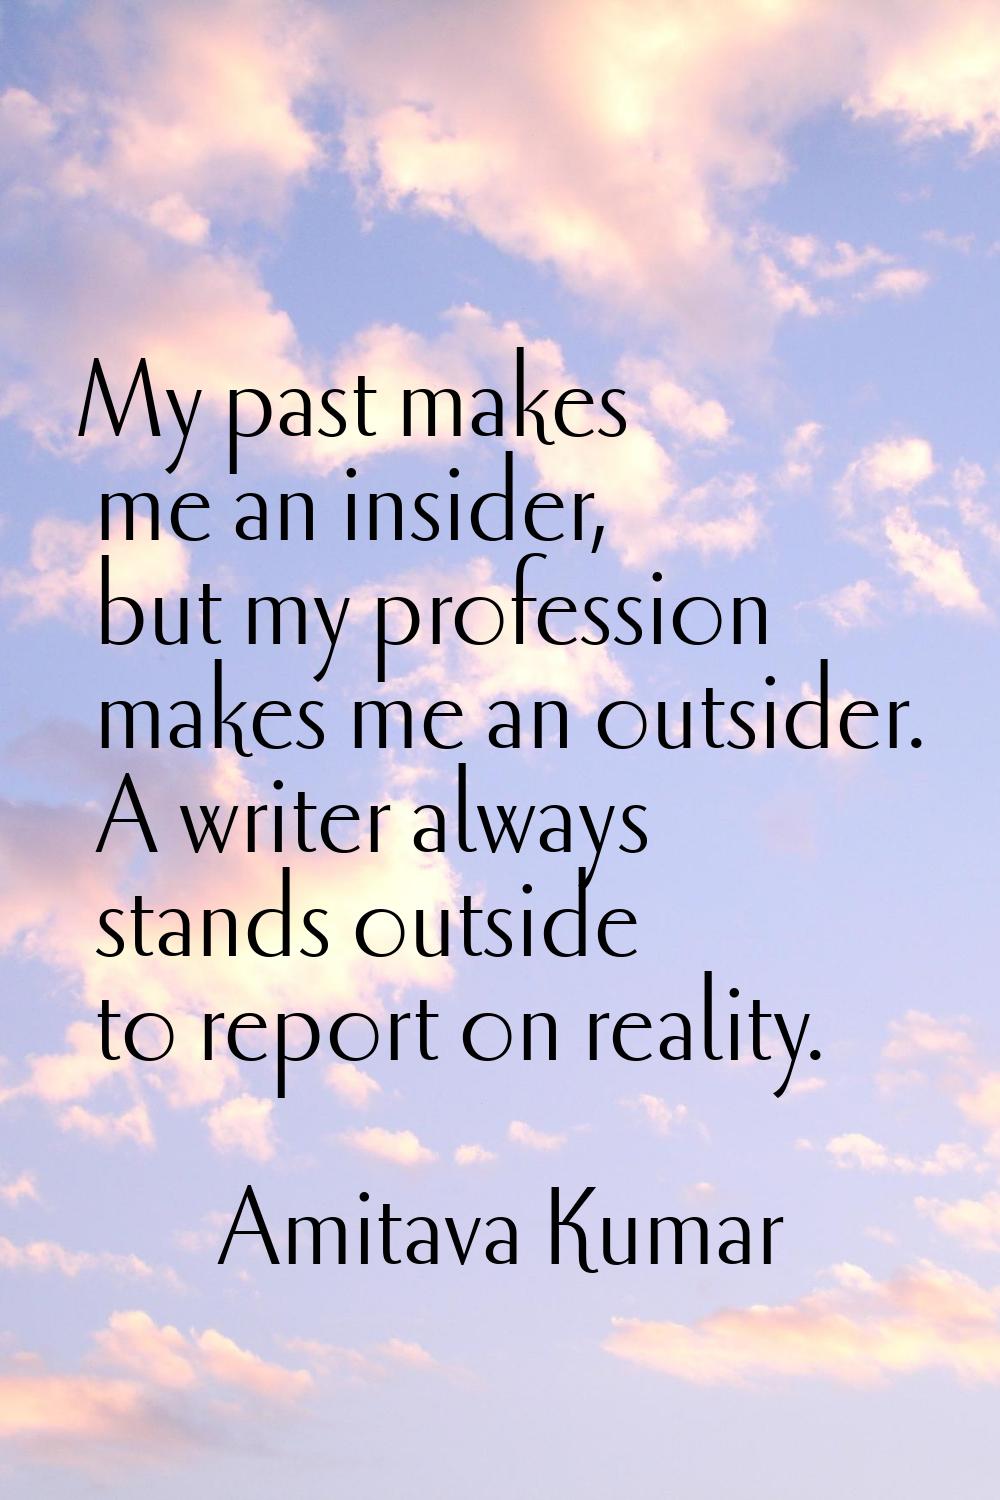 My past makes me an insider, but my profession makes me an outsider. A writer always stands outside